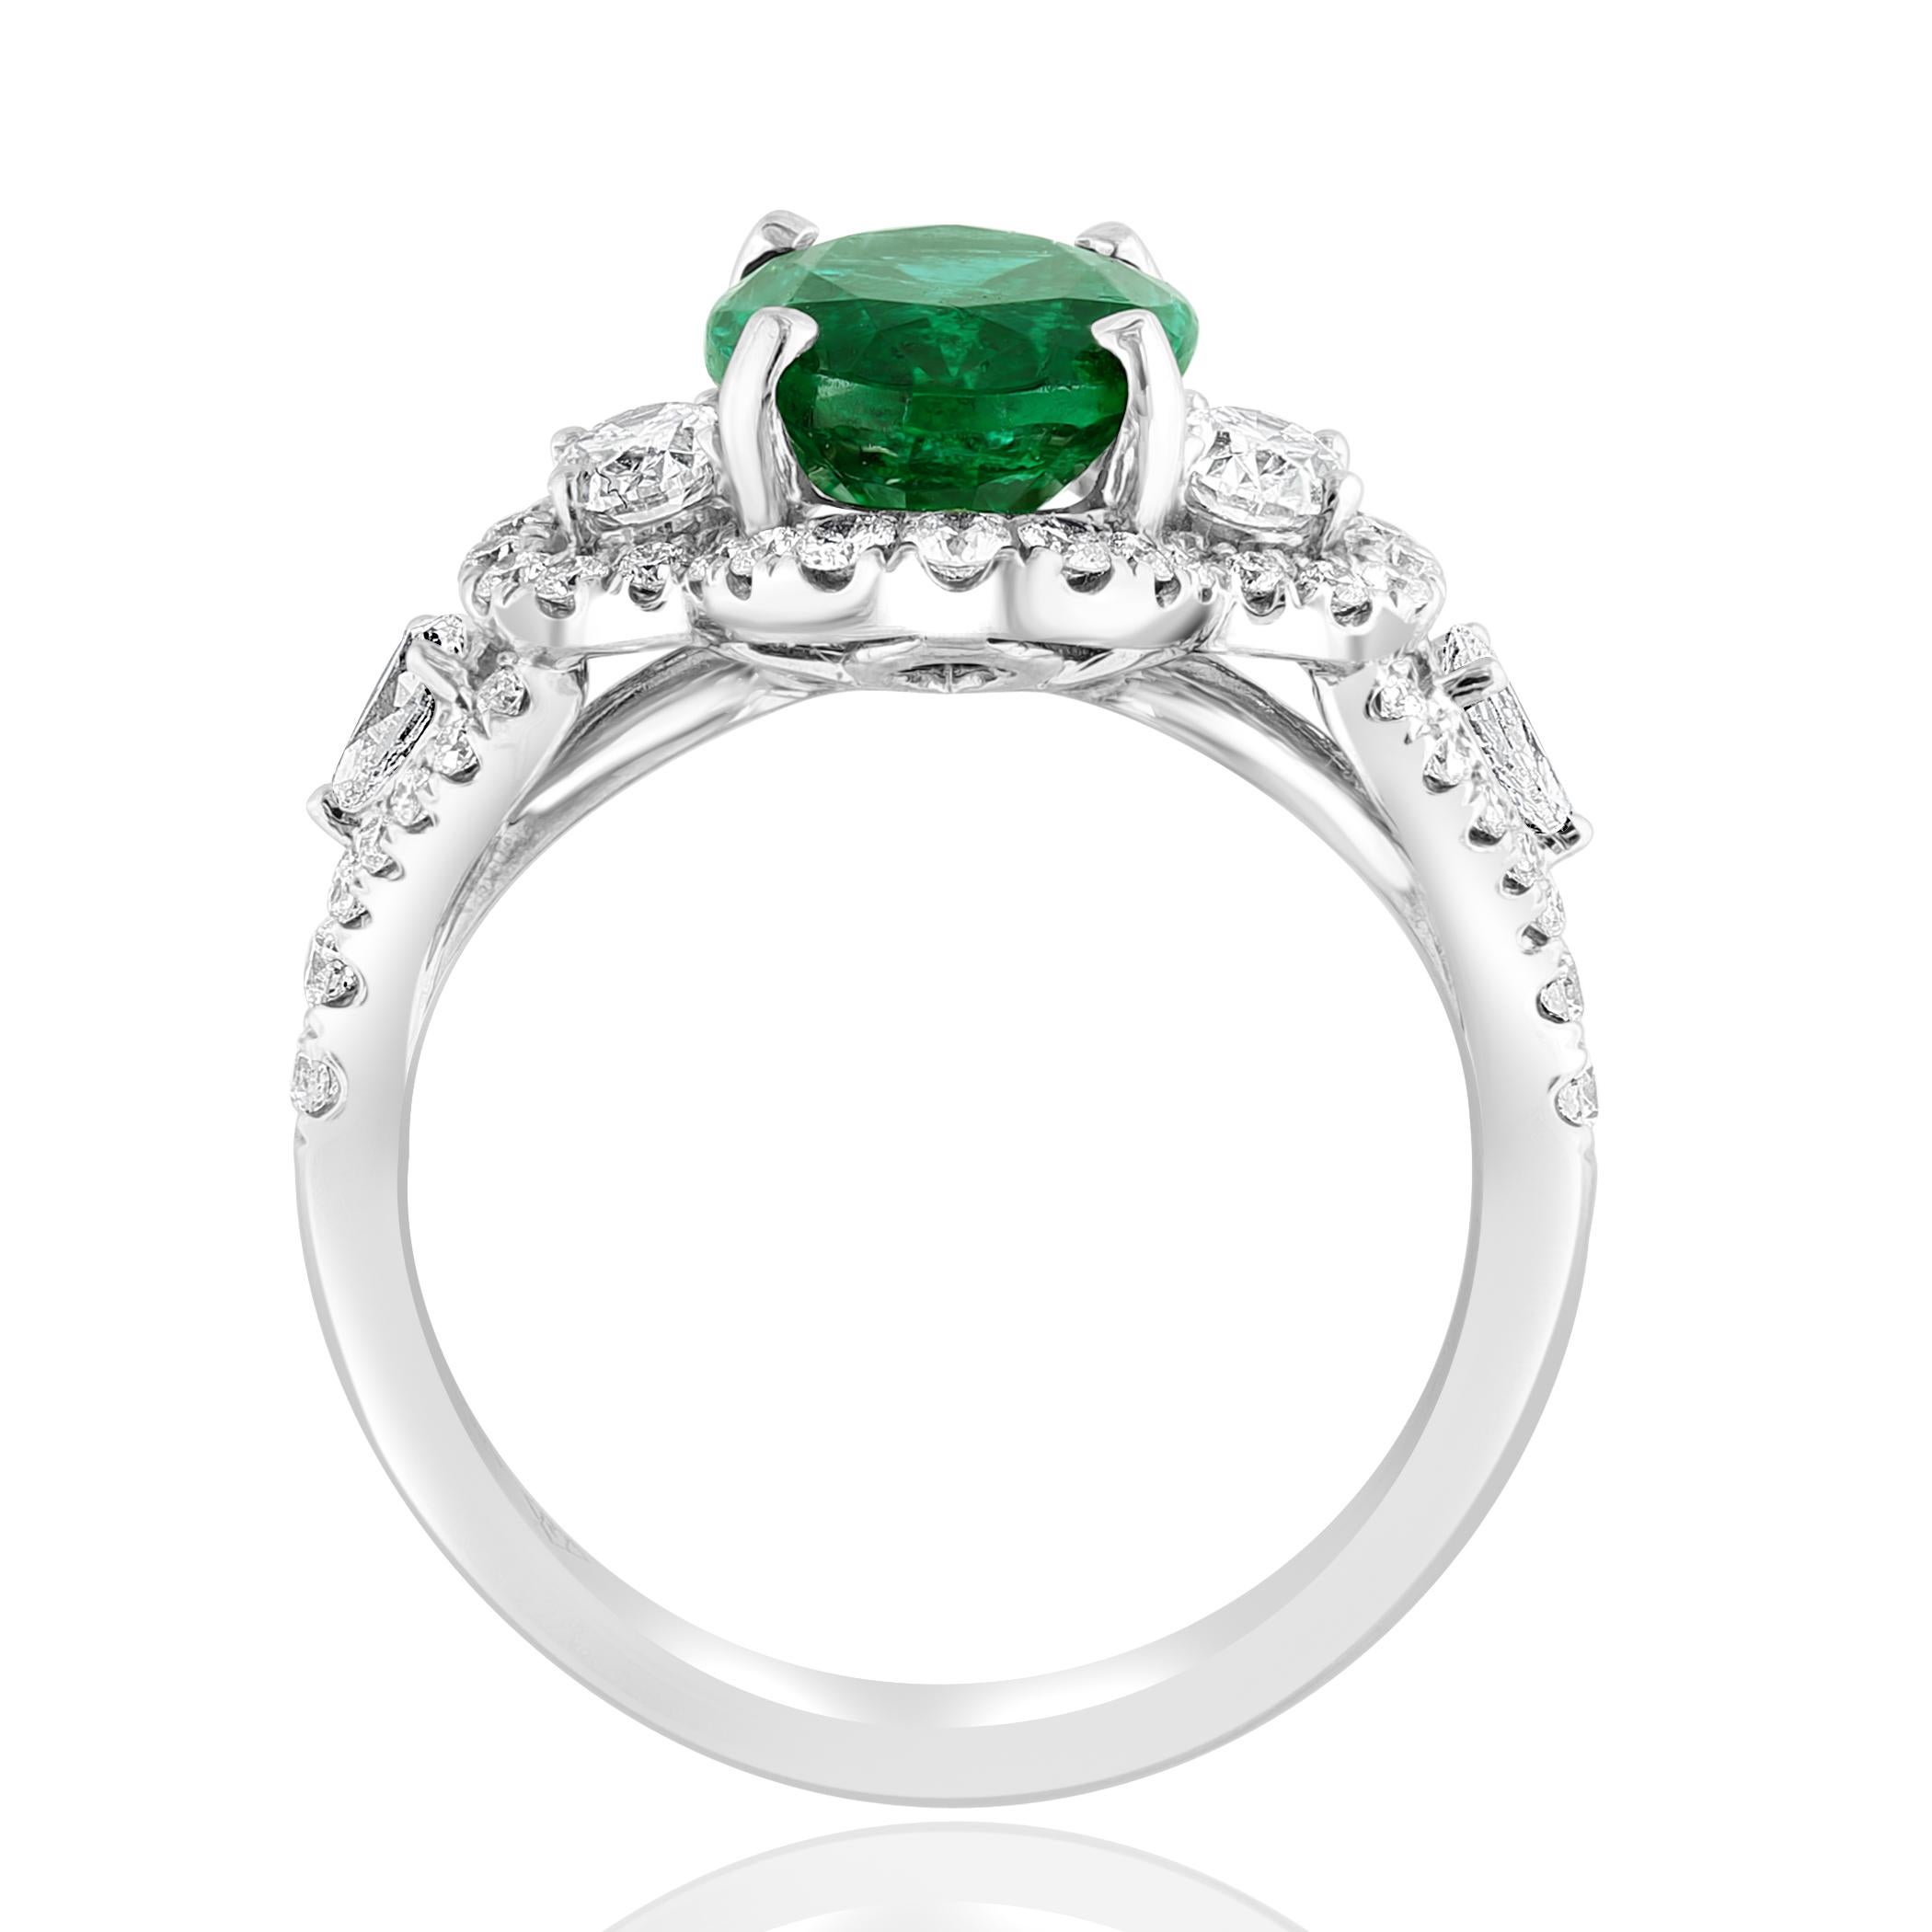 Modern 2.15 Carat Oval Cut Emerald and Diamond Halo Ring in 18K White Gold For Sale